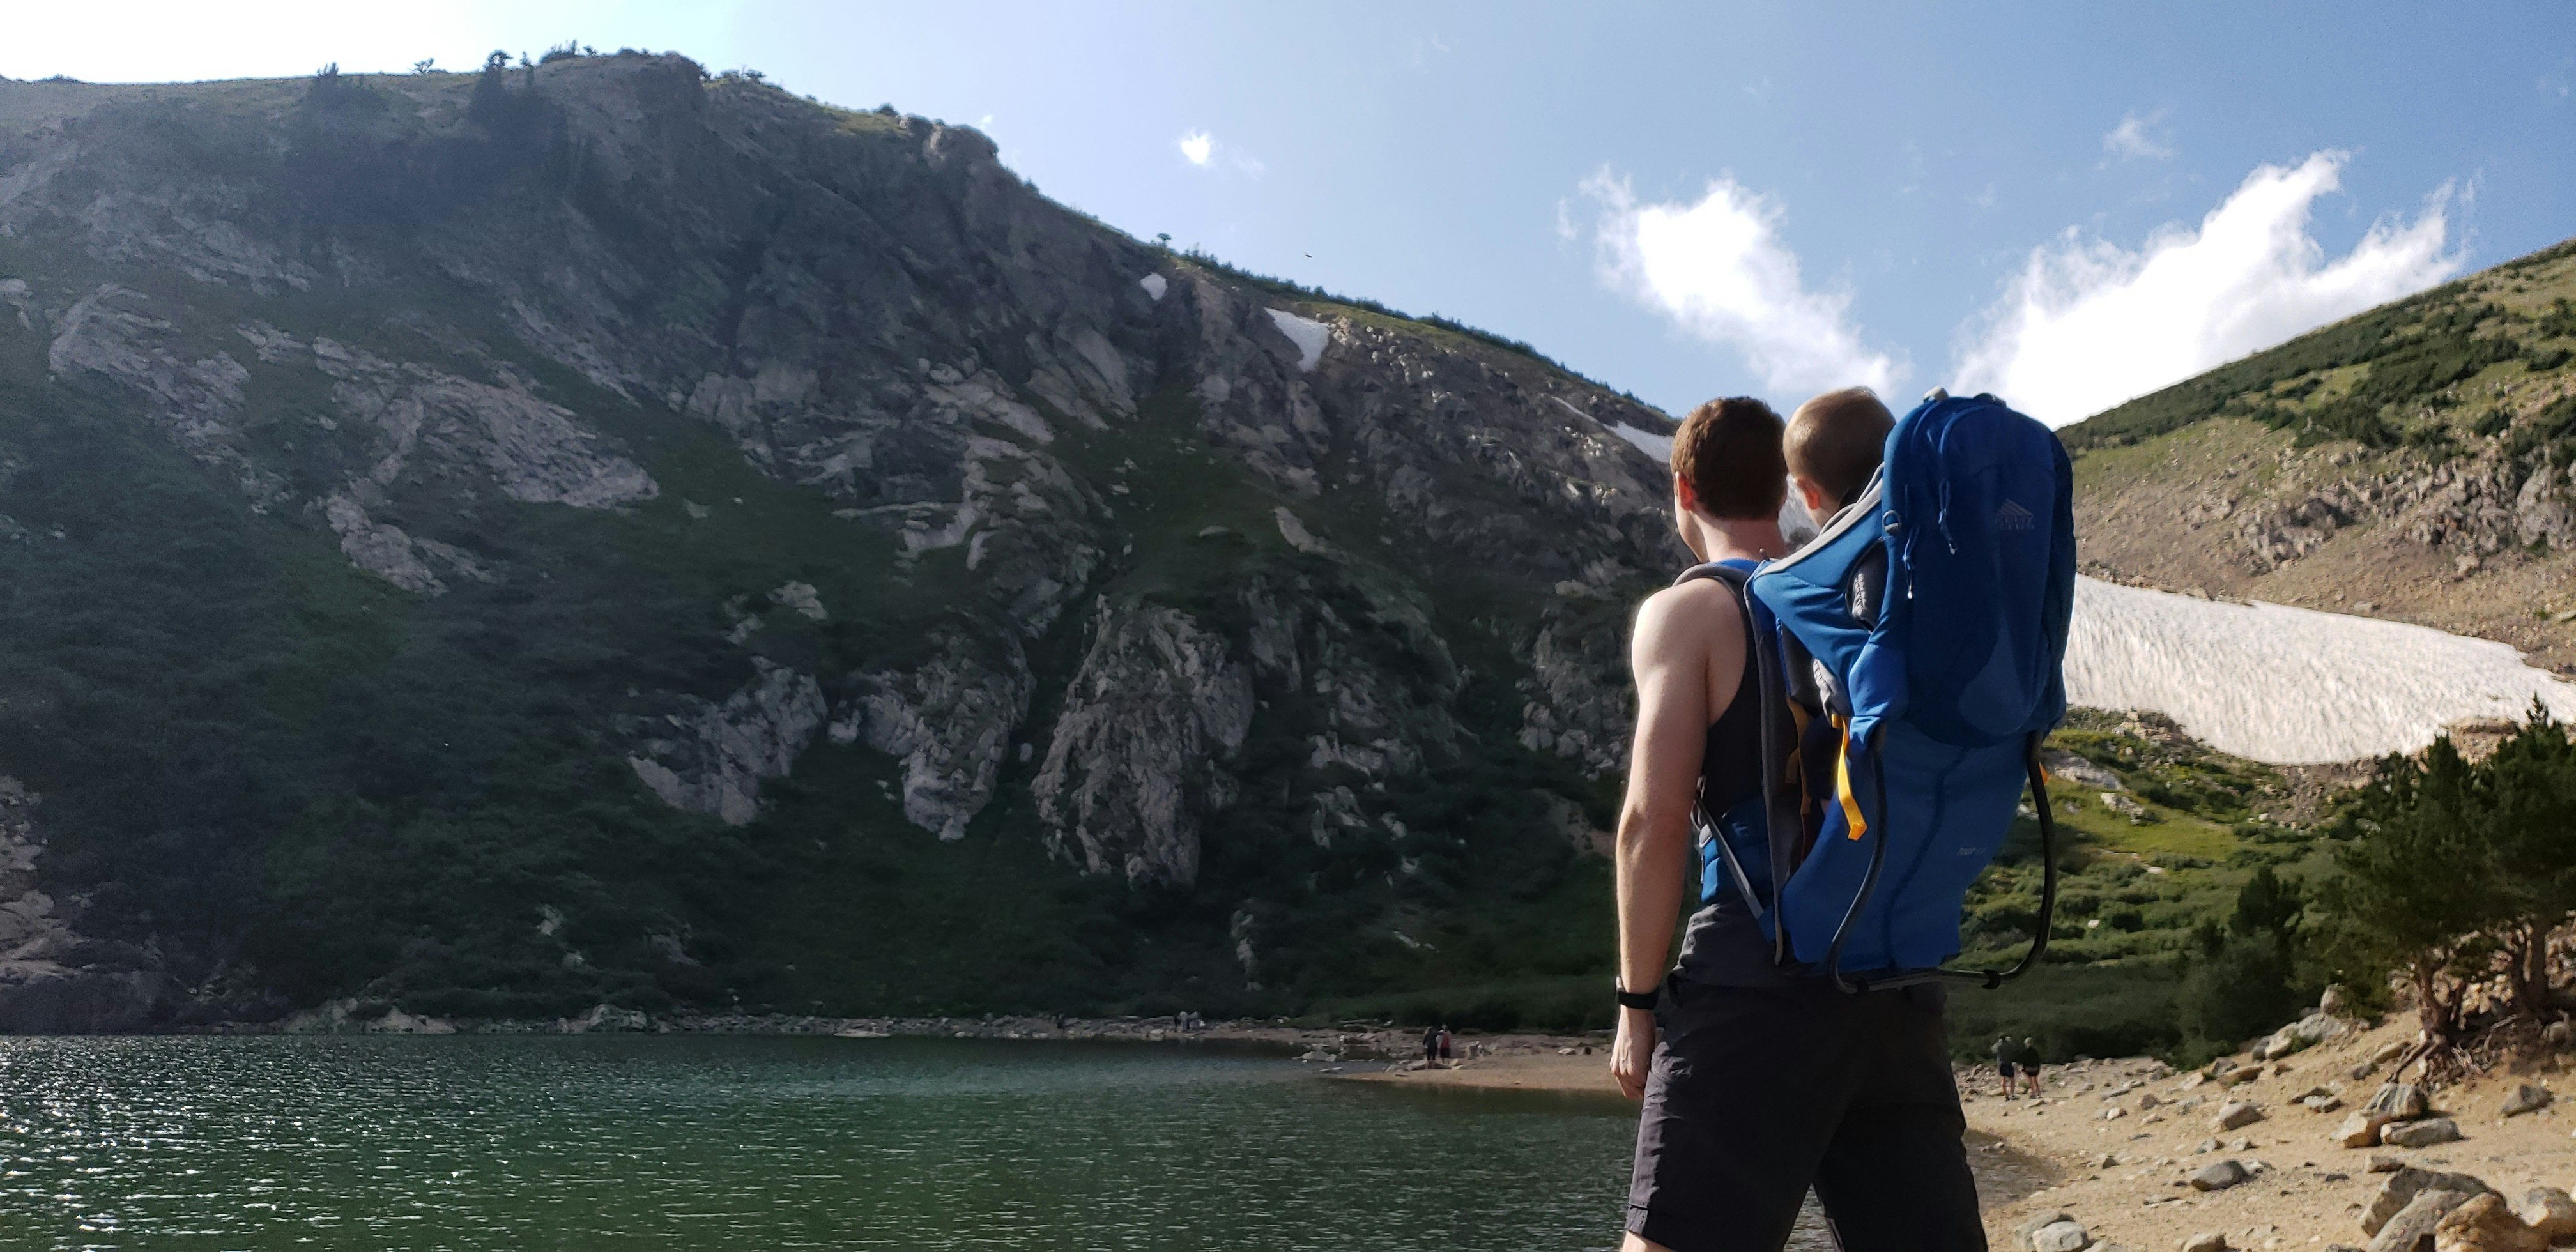 man carrying baby on blue backpack carrier facing mountain near body of water